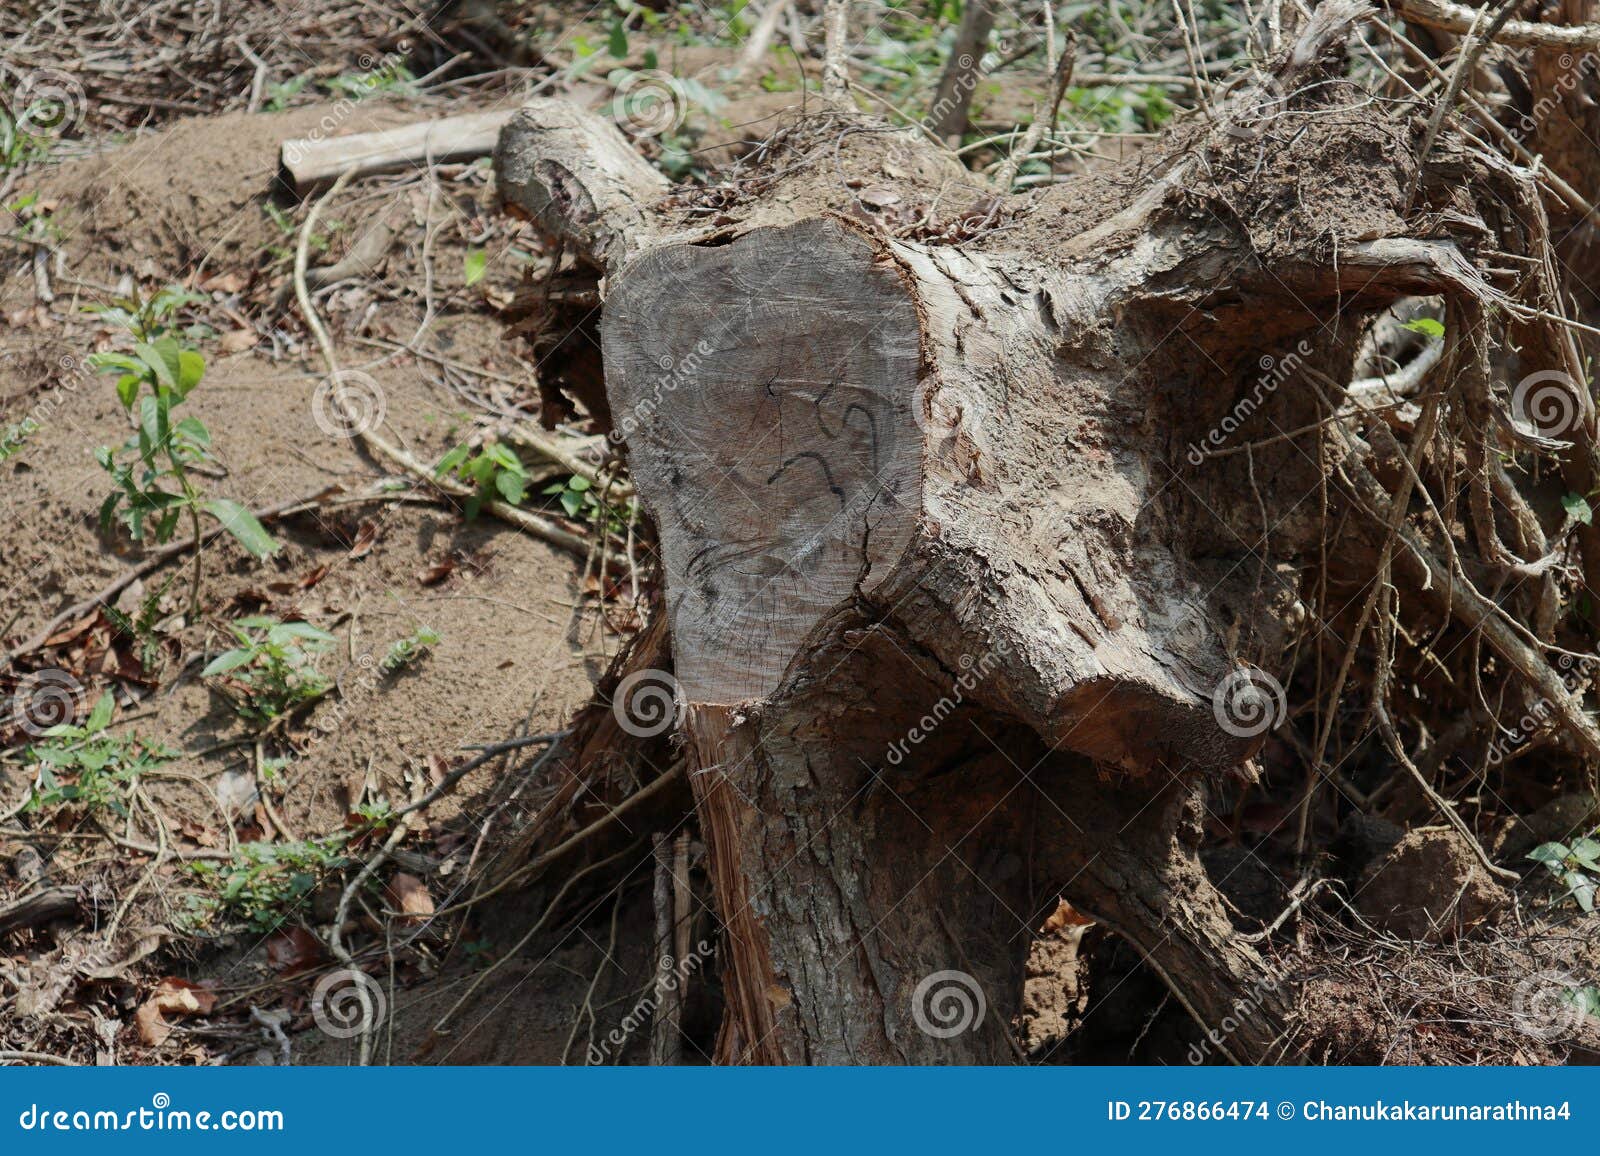 A Dug Tree Stump with the Roots, the Stump Was Excavated from the Soil ...